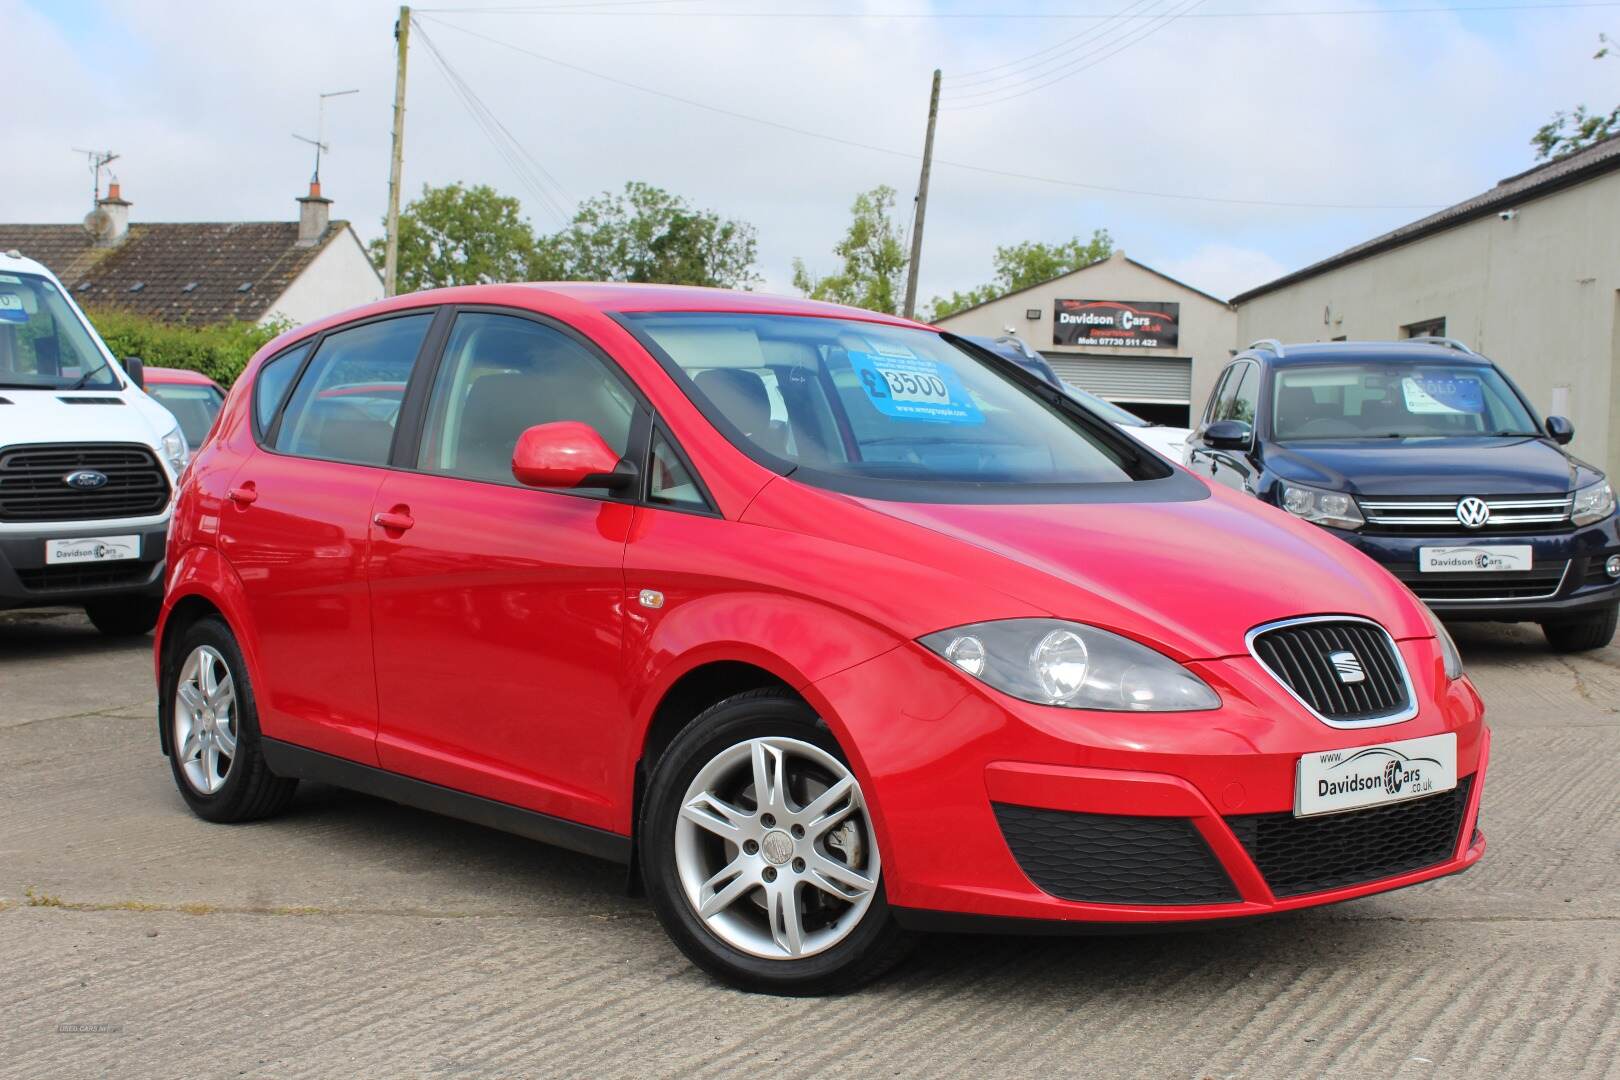 Used SEAT Altea XL 1.6 litre Cars For Sale